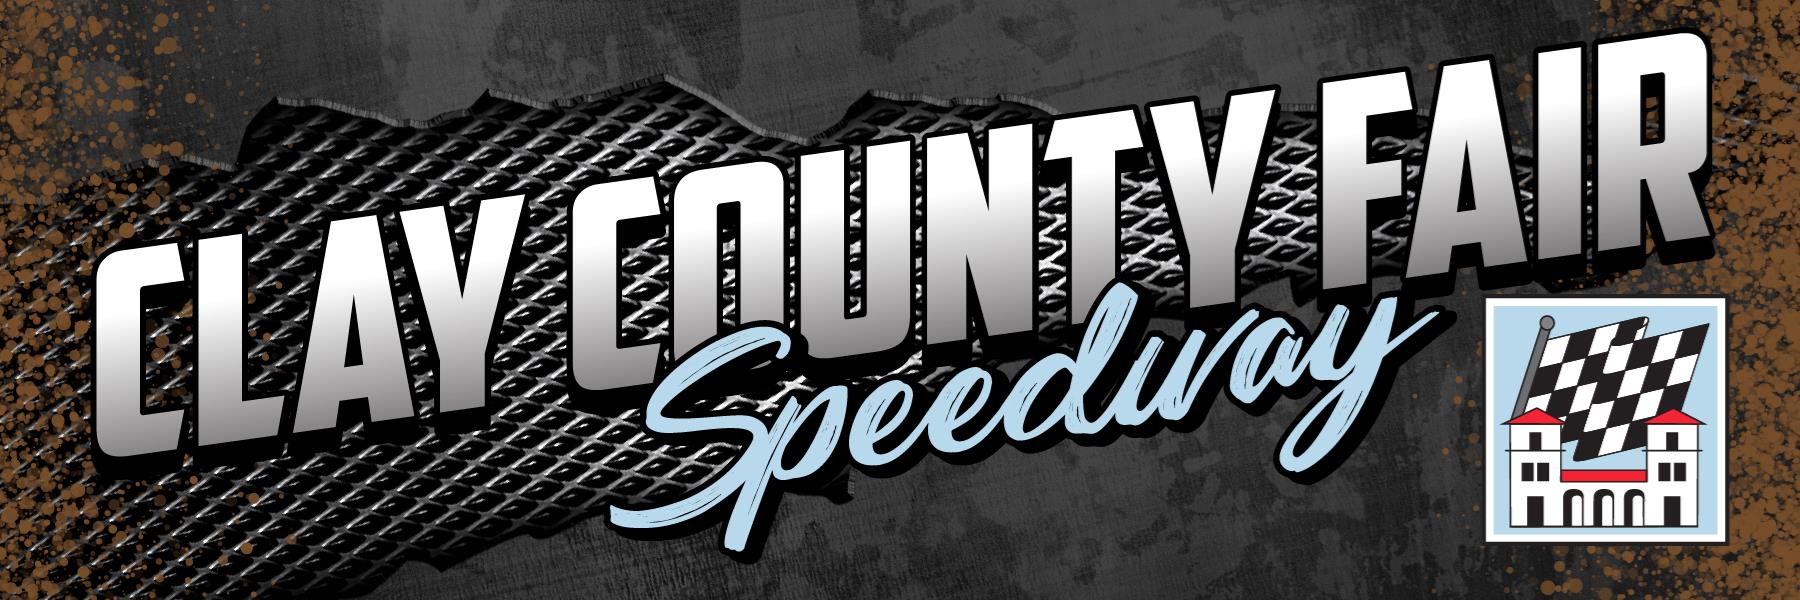 9/15/2021 - Clay County Fair Speedway